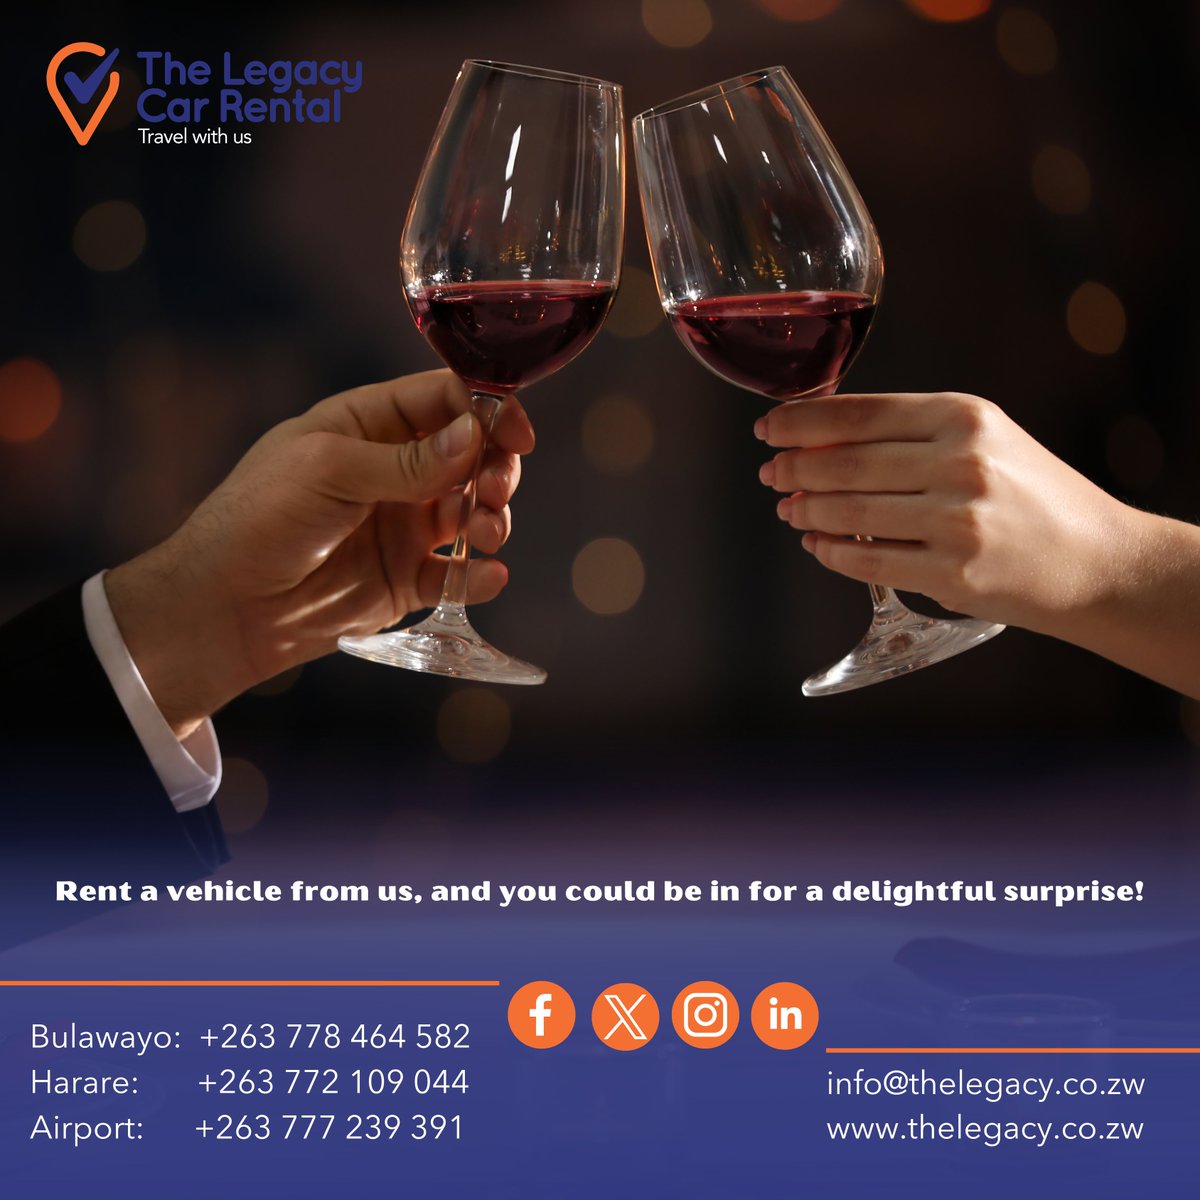 Win romantic dinner tickets by booking a vehicle with us this February! 
#valentinesgift #MakeAnImpression #RideInStyle #HassleFree #chauffeur #valentines #BookNow #airporttaxi #love #BudgetFriendly #loveisintheair #madeforyou #carhire #travelwithus